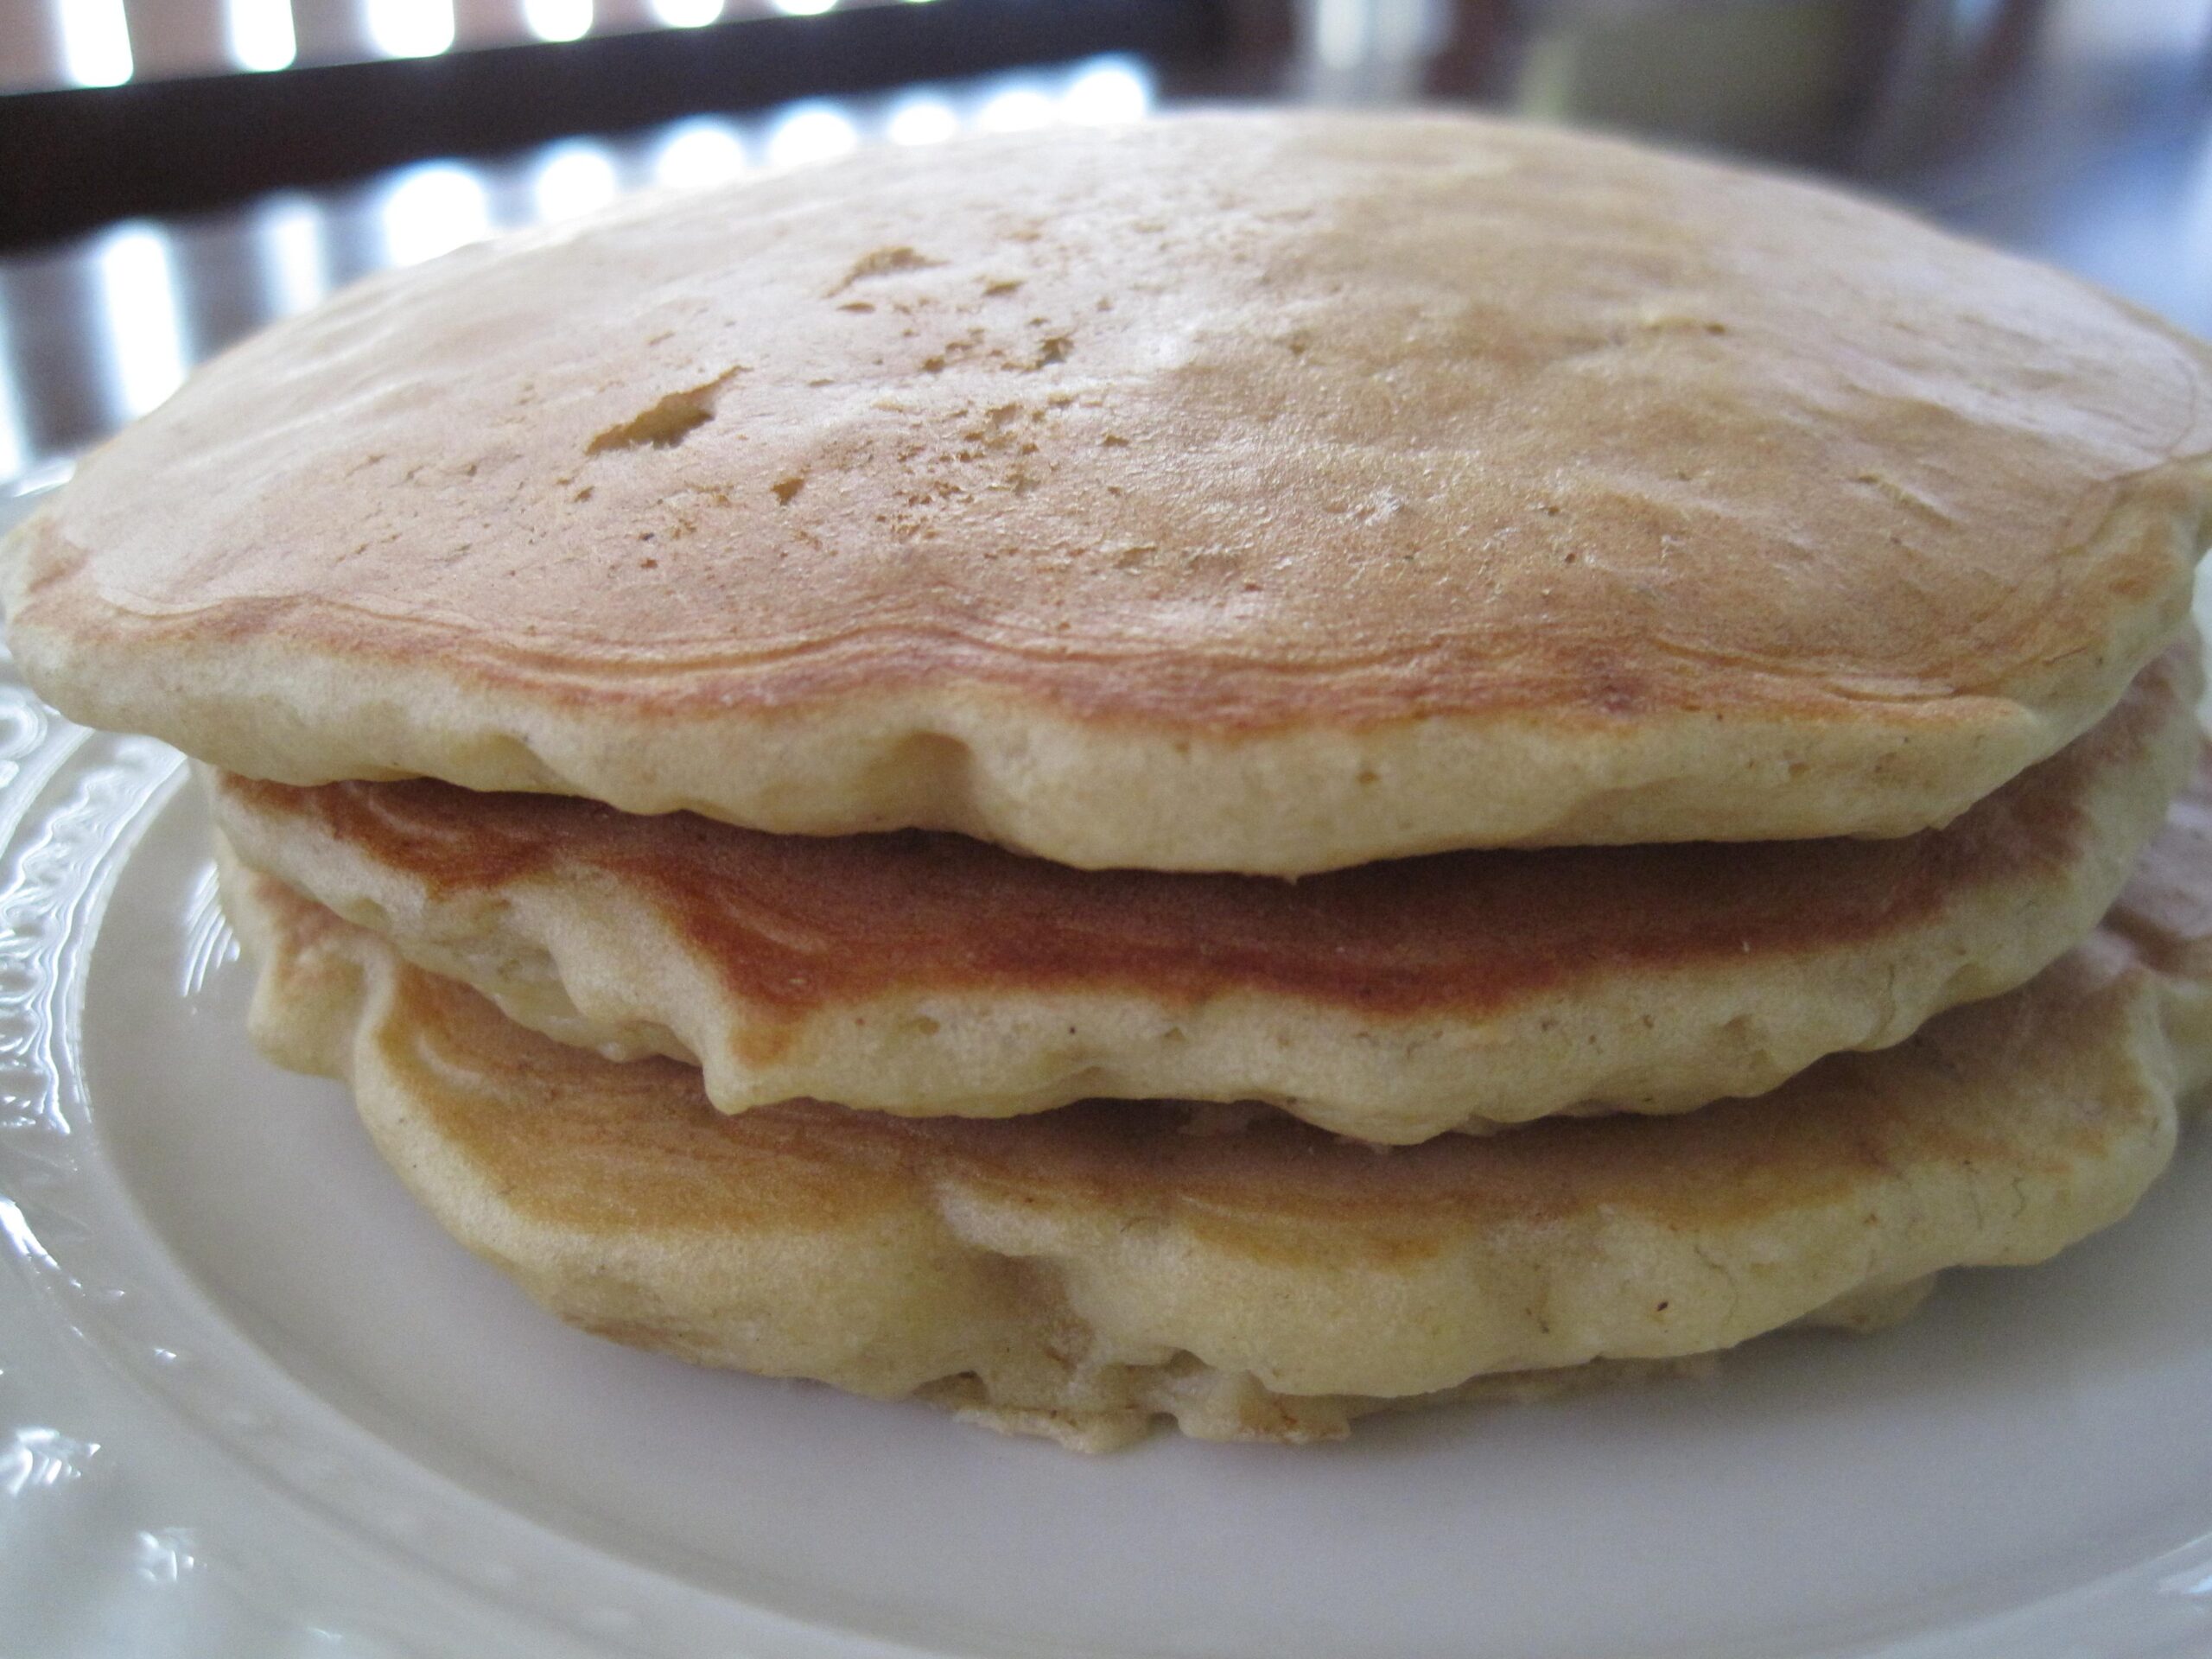  Wake up to the smell of freshly cooked gluten-free Rolled Oats Pancakes